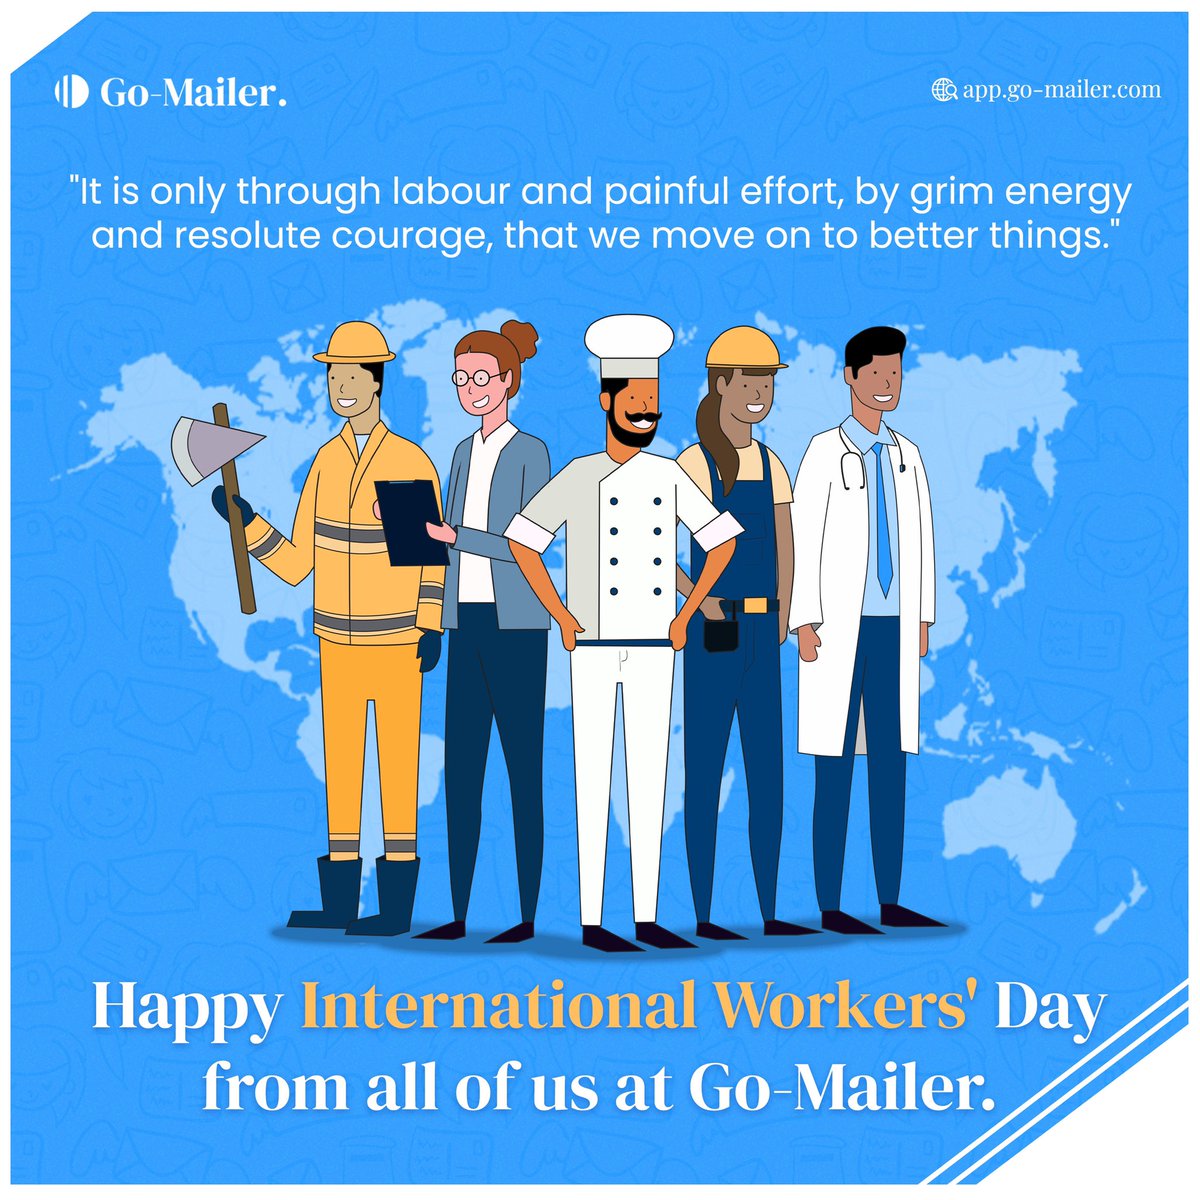 Each and every worker needs to be treated with dignity and respect. 

Wishing you a Happy International Workers Day from all of us at Go-Mailer!
.
.
#gomailer #happyworkersday🇳🇬 #internationalworkersday #emailmarketing #MayDay2024